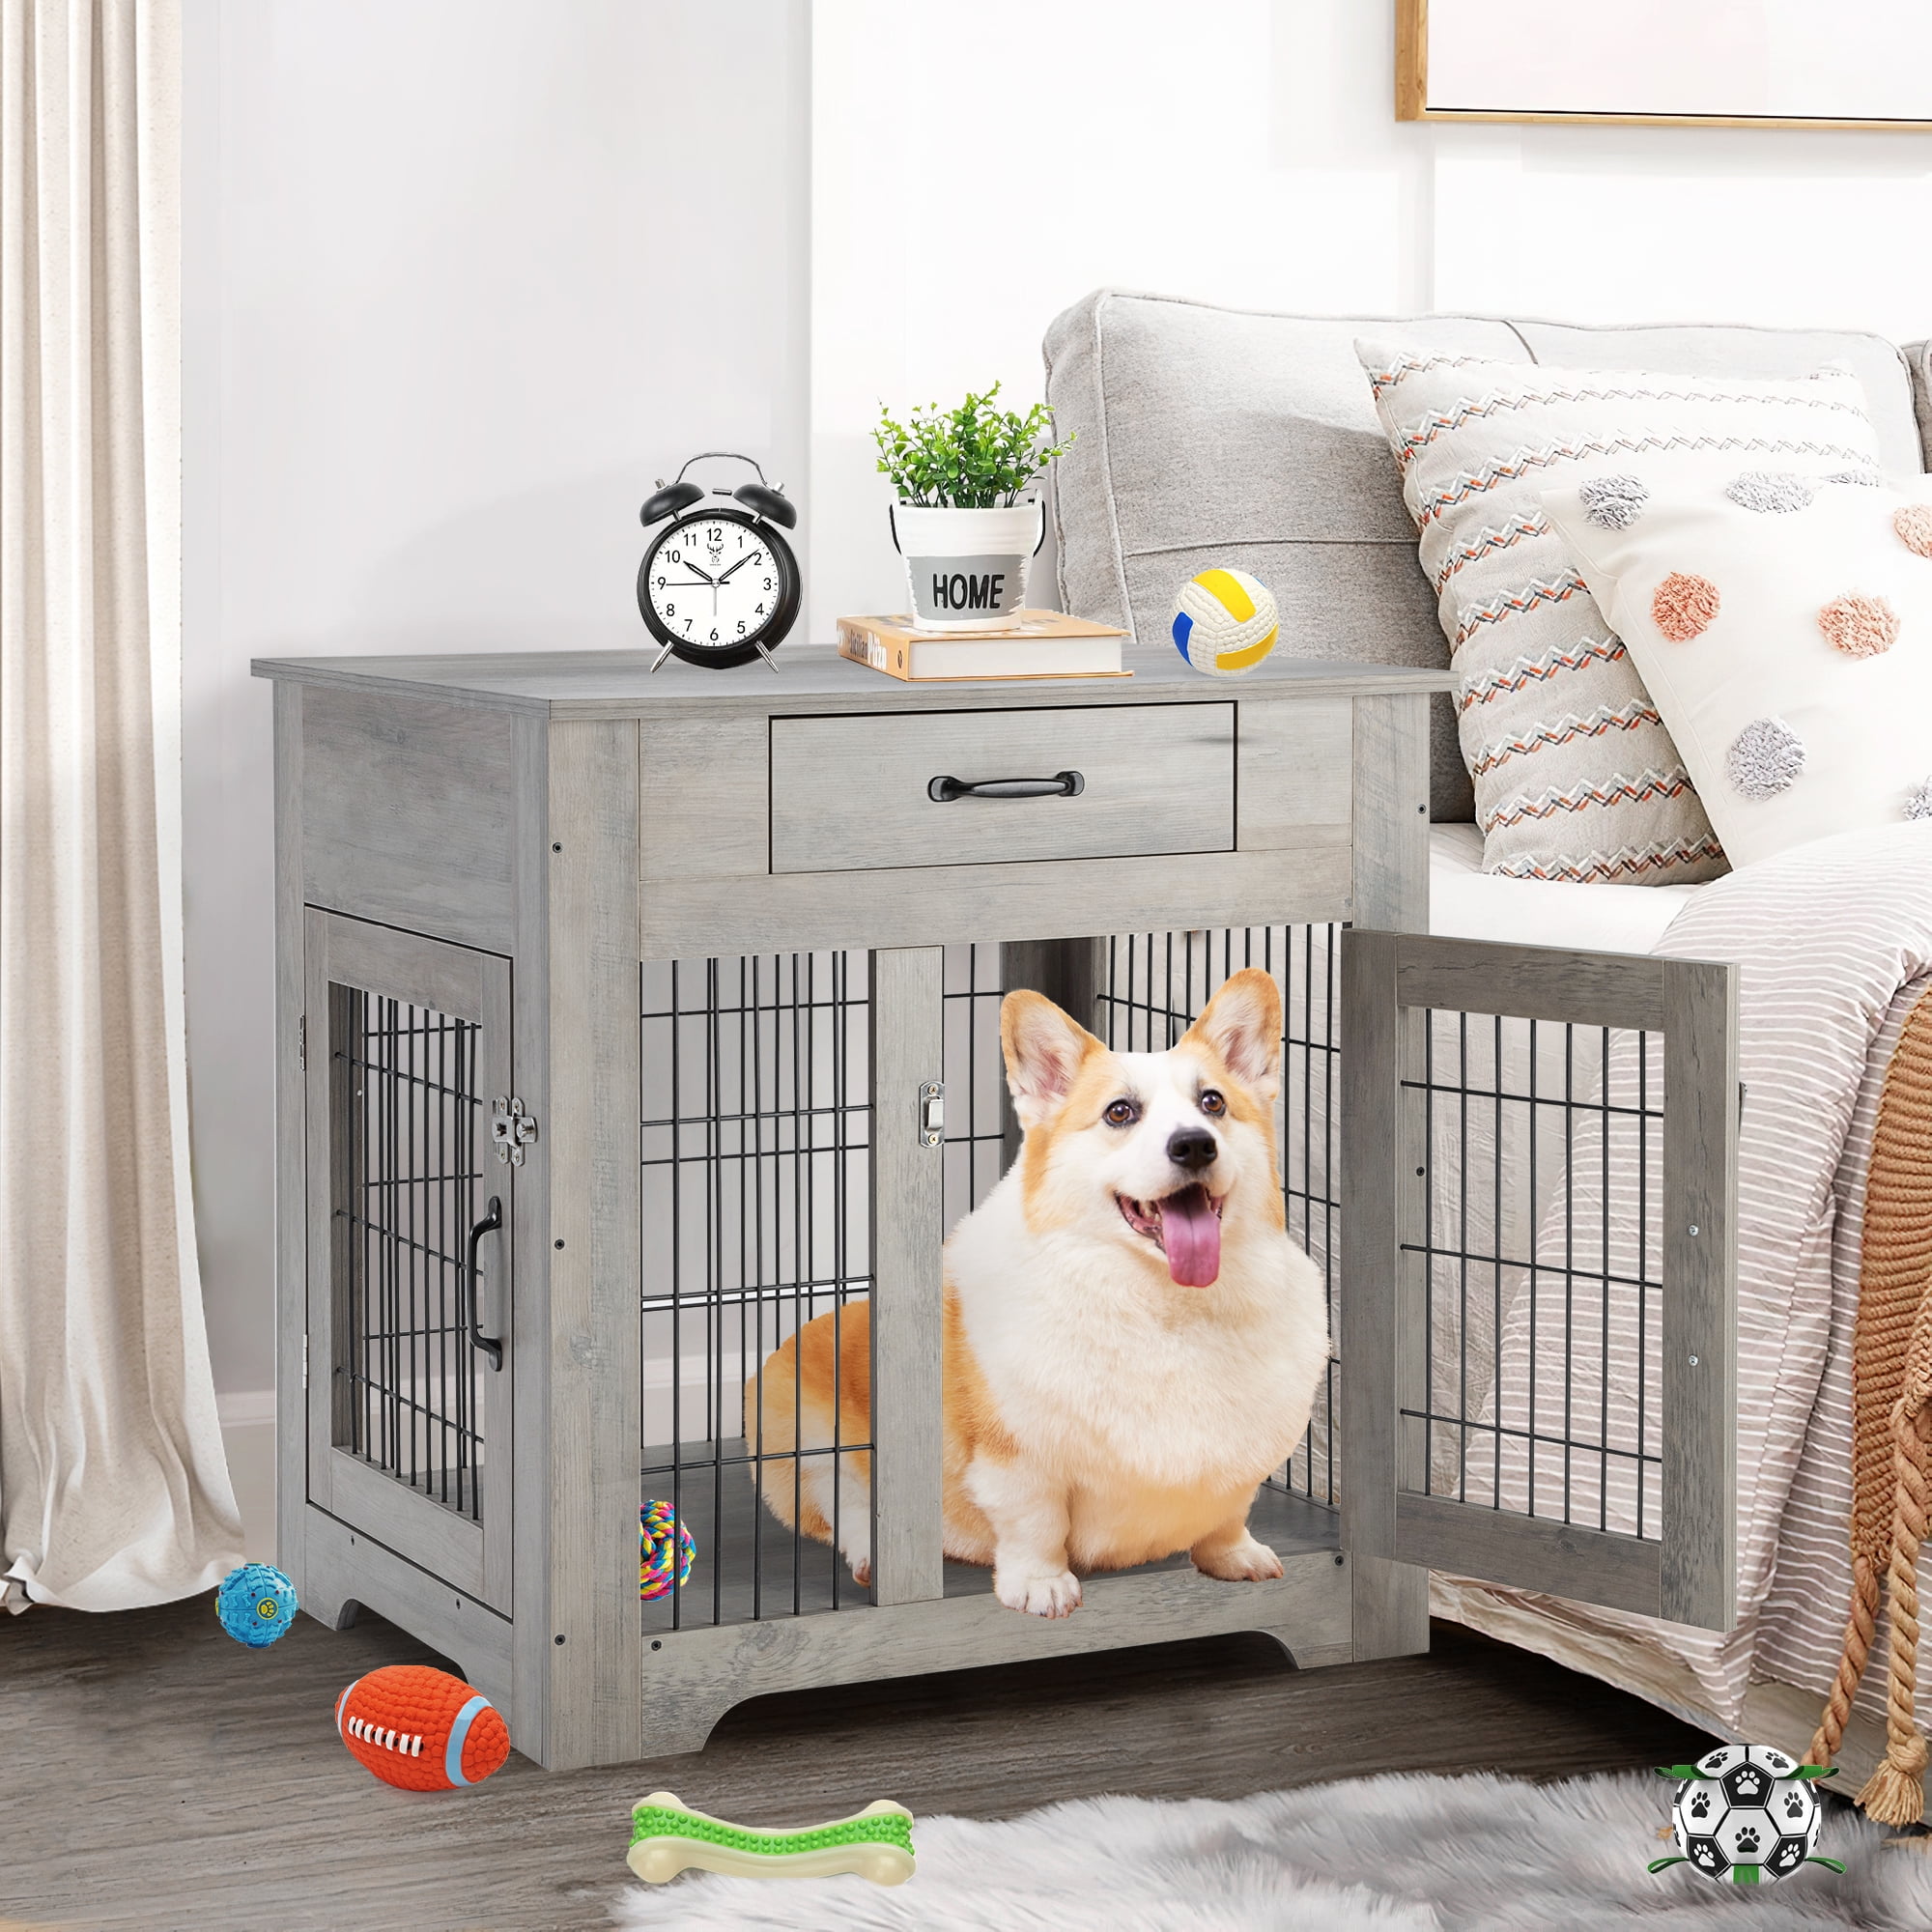 Say Goodbye to Wire Crates With the Chic Wooffy Dog House